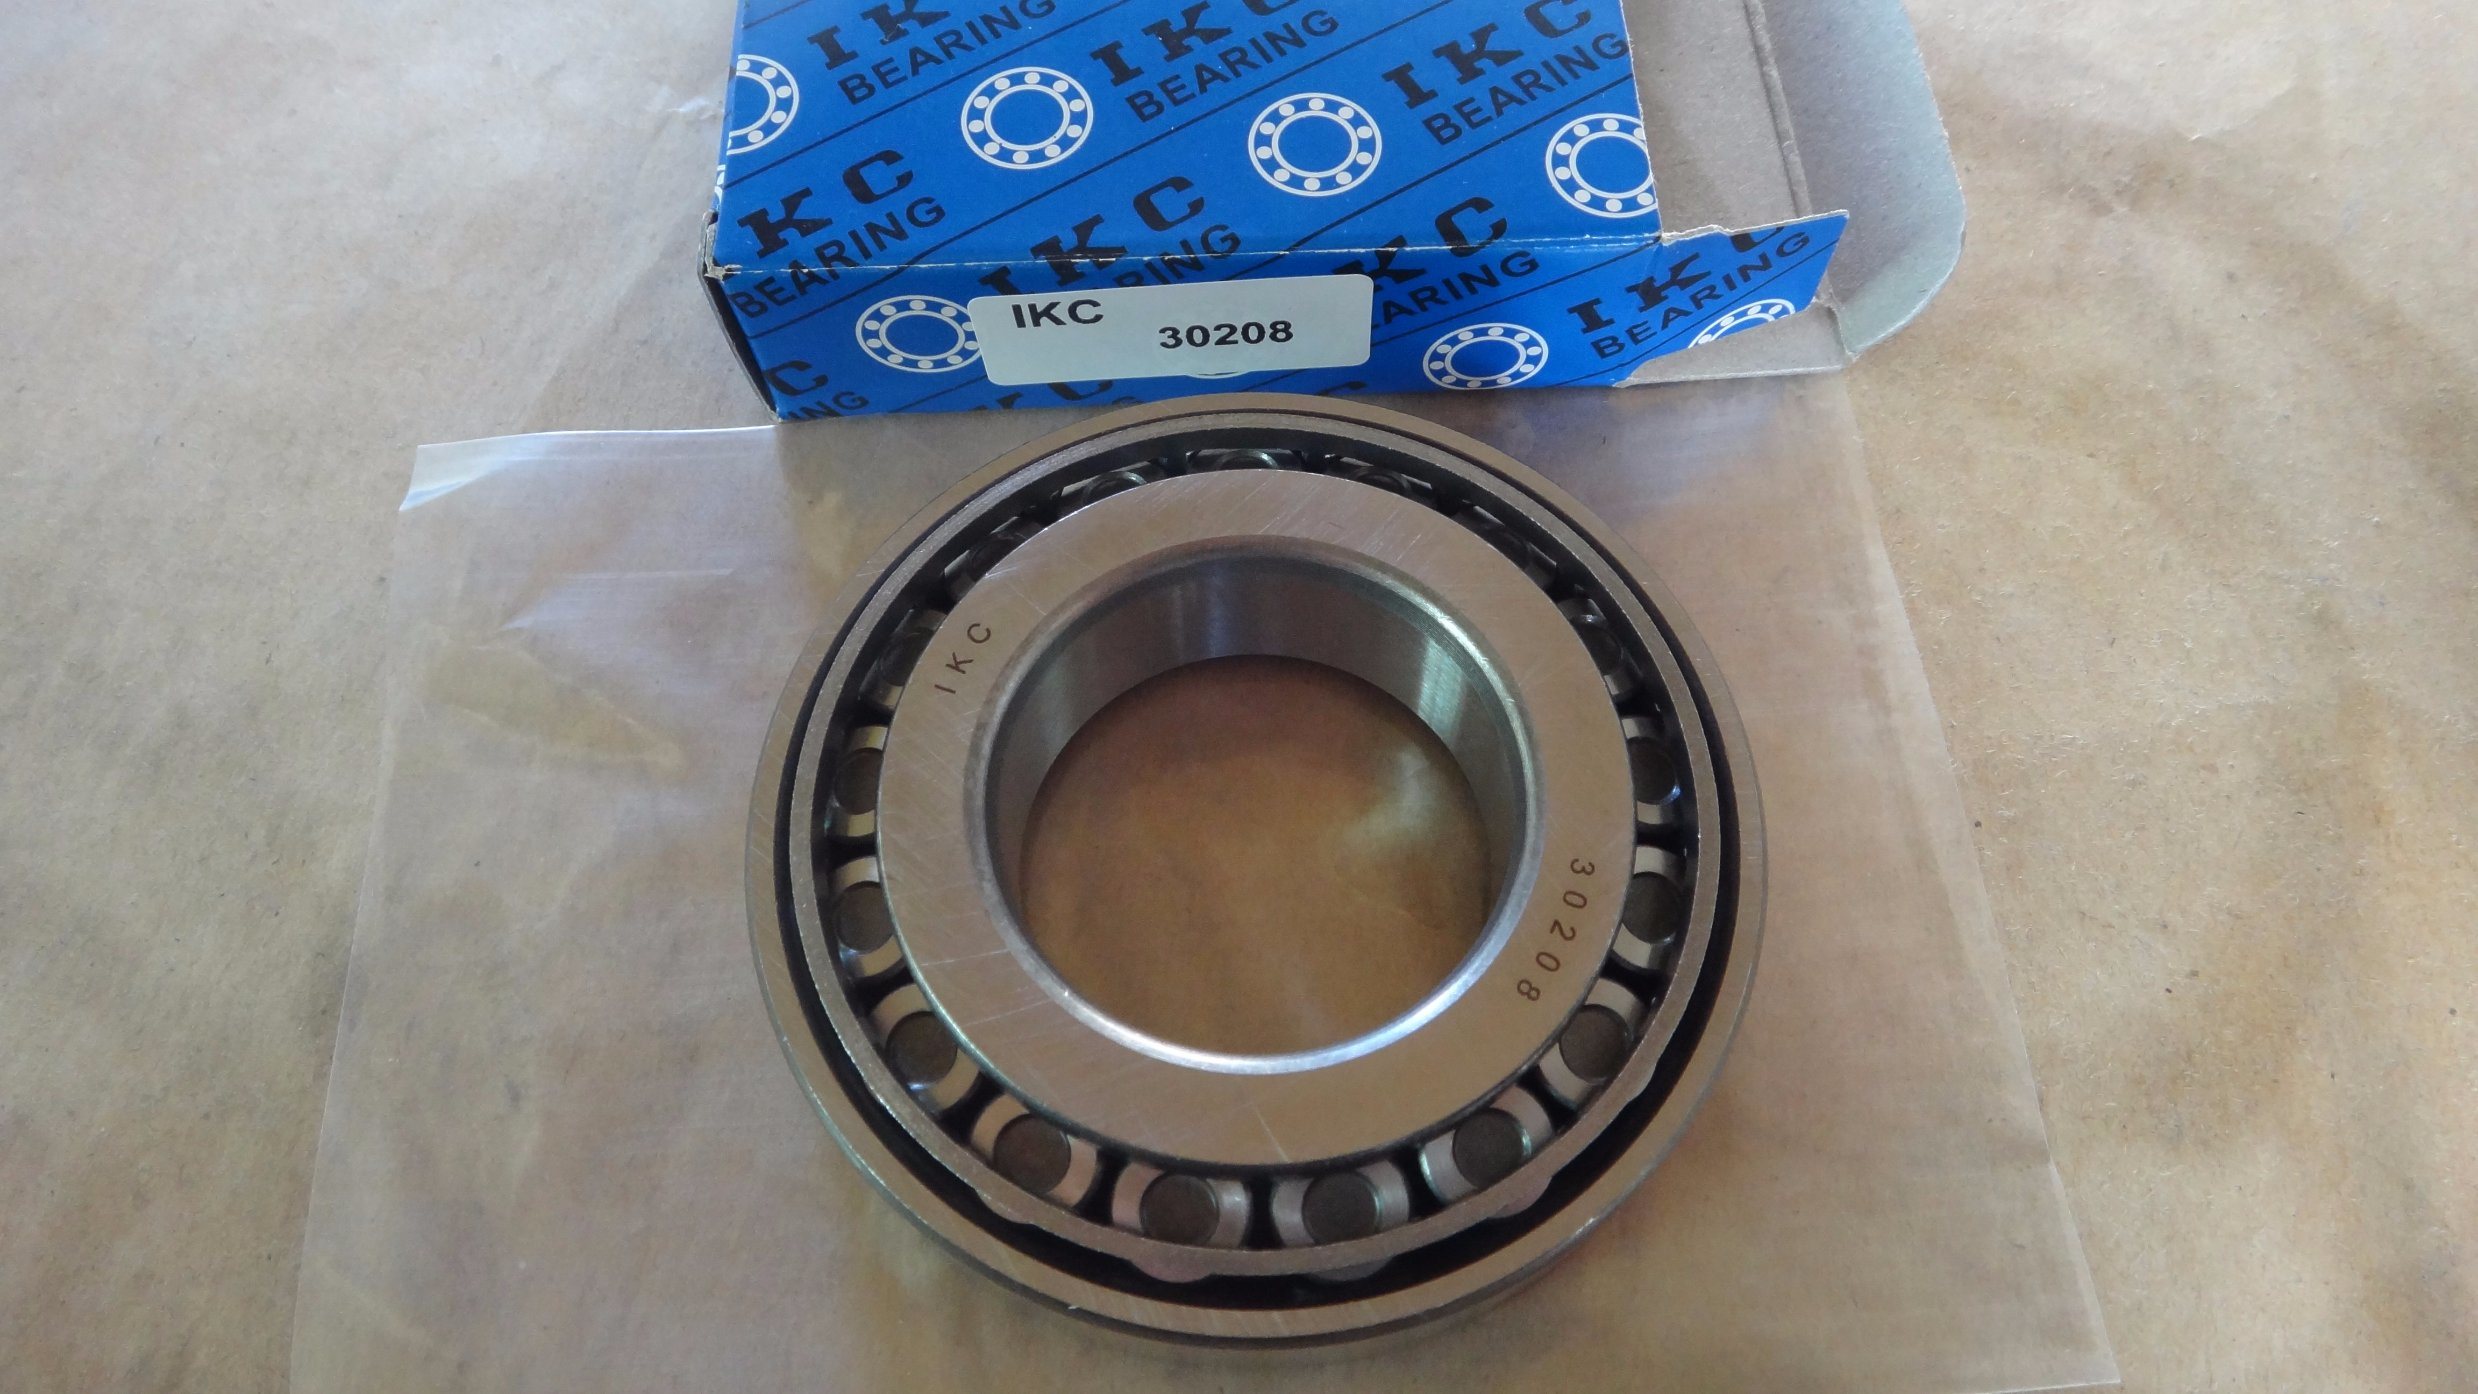 30208 Taper Roller Bearing Wheel Hub Auto/ Agricultural Machinery Bearing 30207 30209 30210 30211 30212 30213